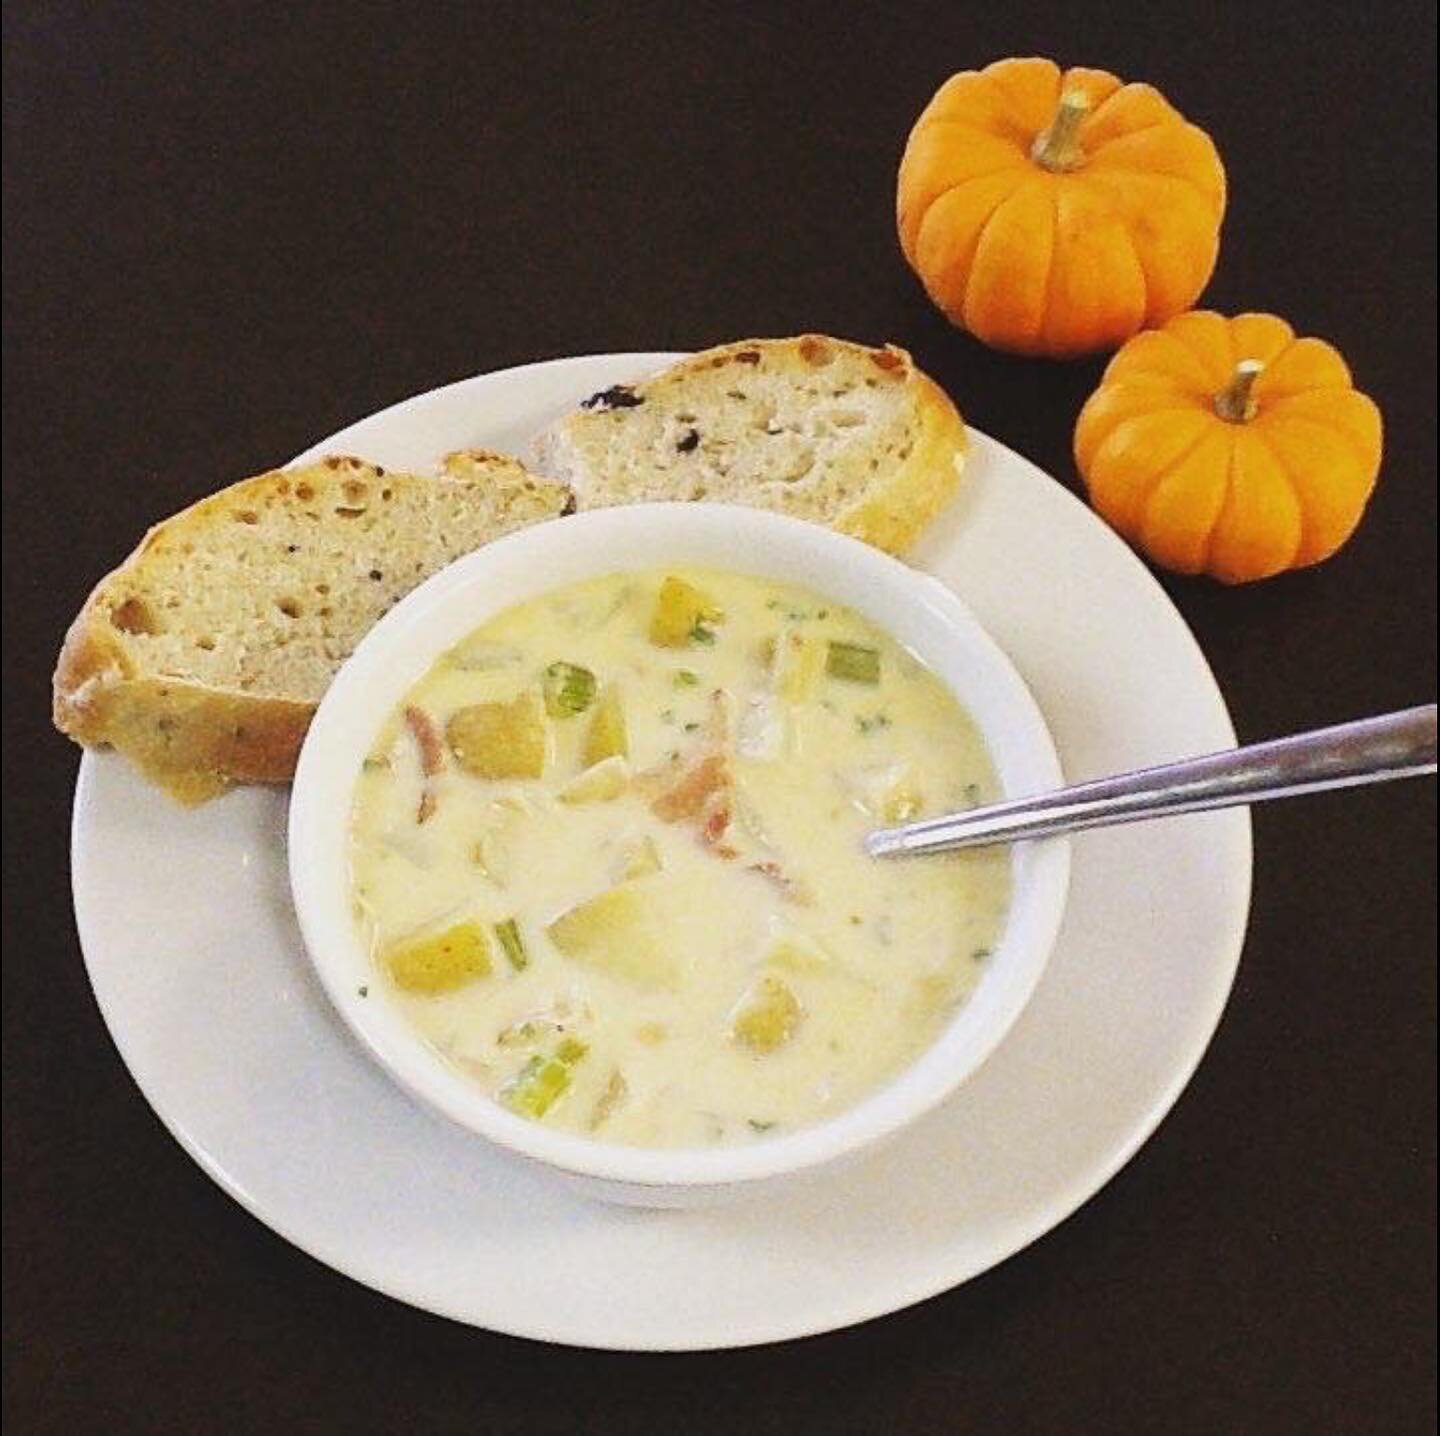 Good morning! ☀️
We hope you&rsquo;re having a great day!
Today we have our creamy bacon potato soup available for lunch🤤
We also have our yummy turkey sugar cookies🤗😋